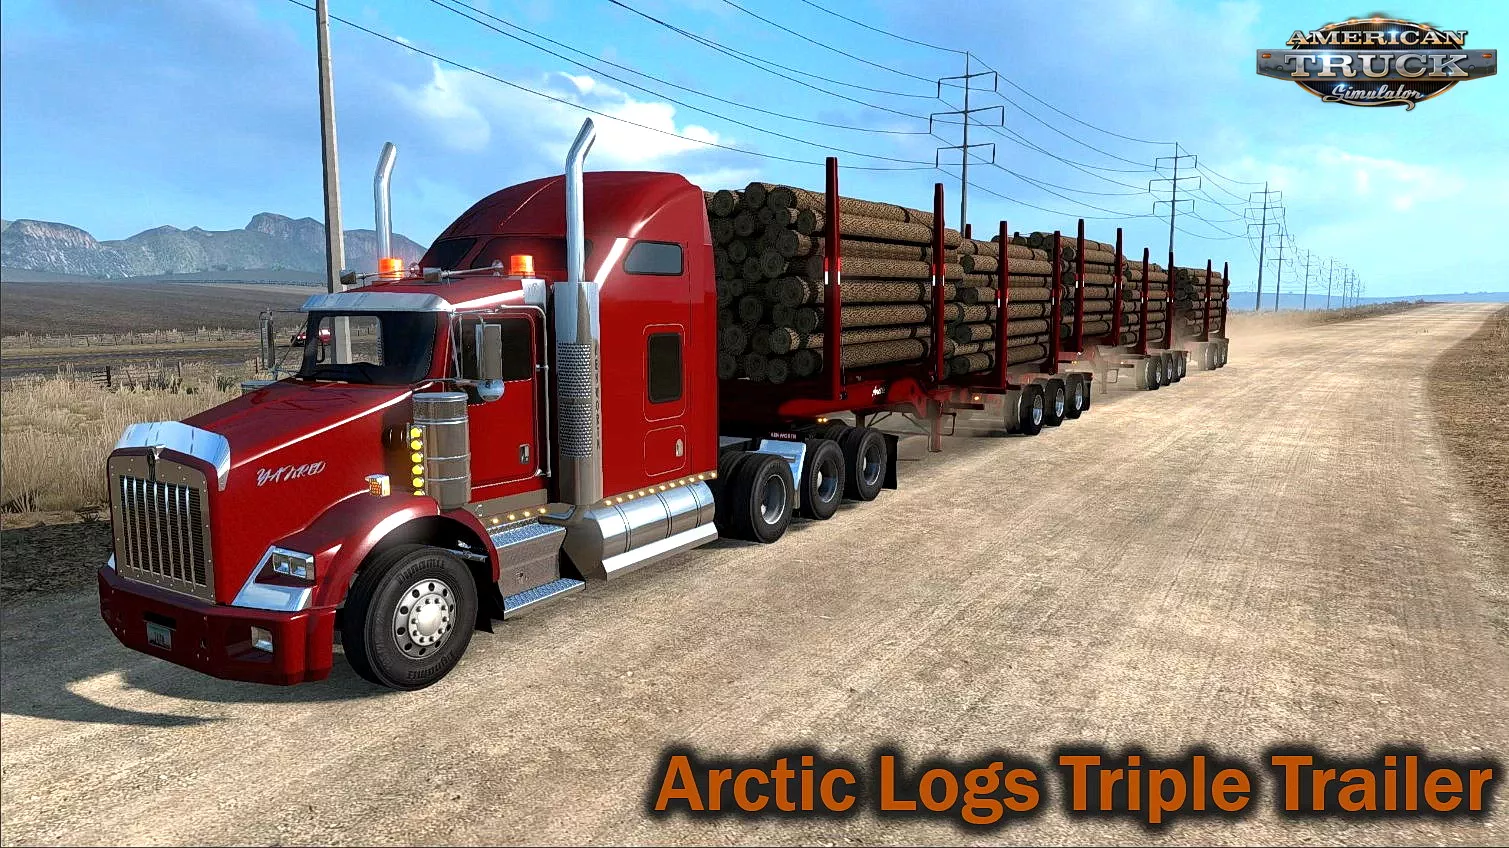 Arctic Logs Triple Trailer Ownable v1.2 (1.49.x) for ATS